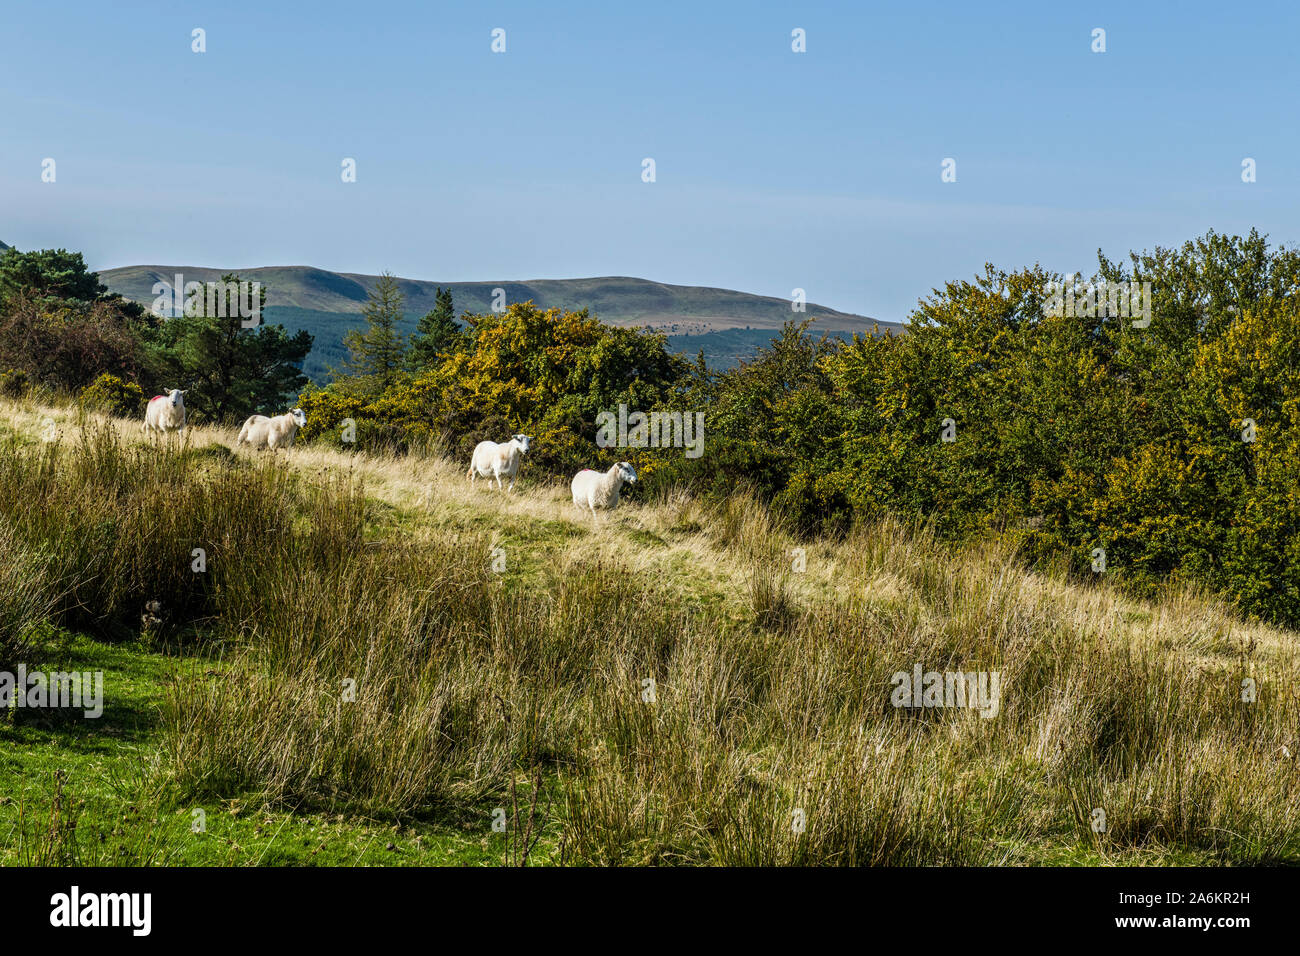 Sheep on the hill above the Talybont Valley in the Brecon Beacons National Park south Wales. Brecon Beacons sheep farming on the hills is normal. Stock Photo